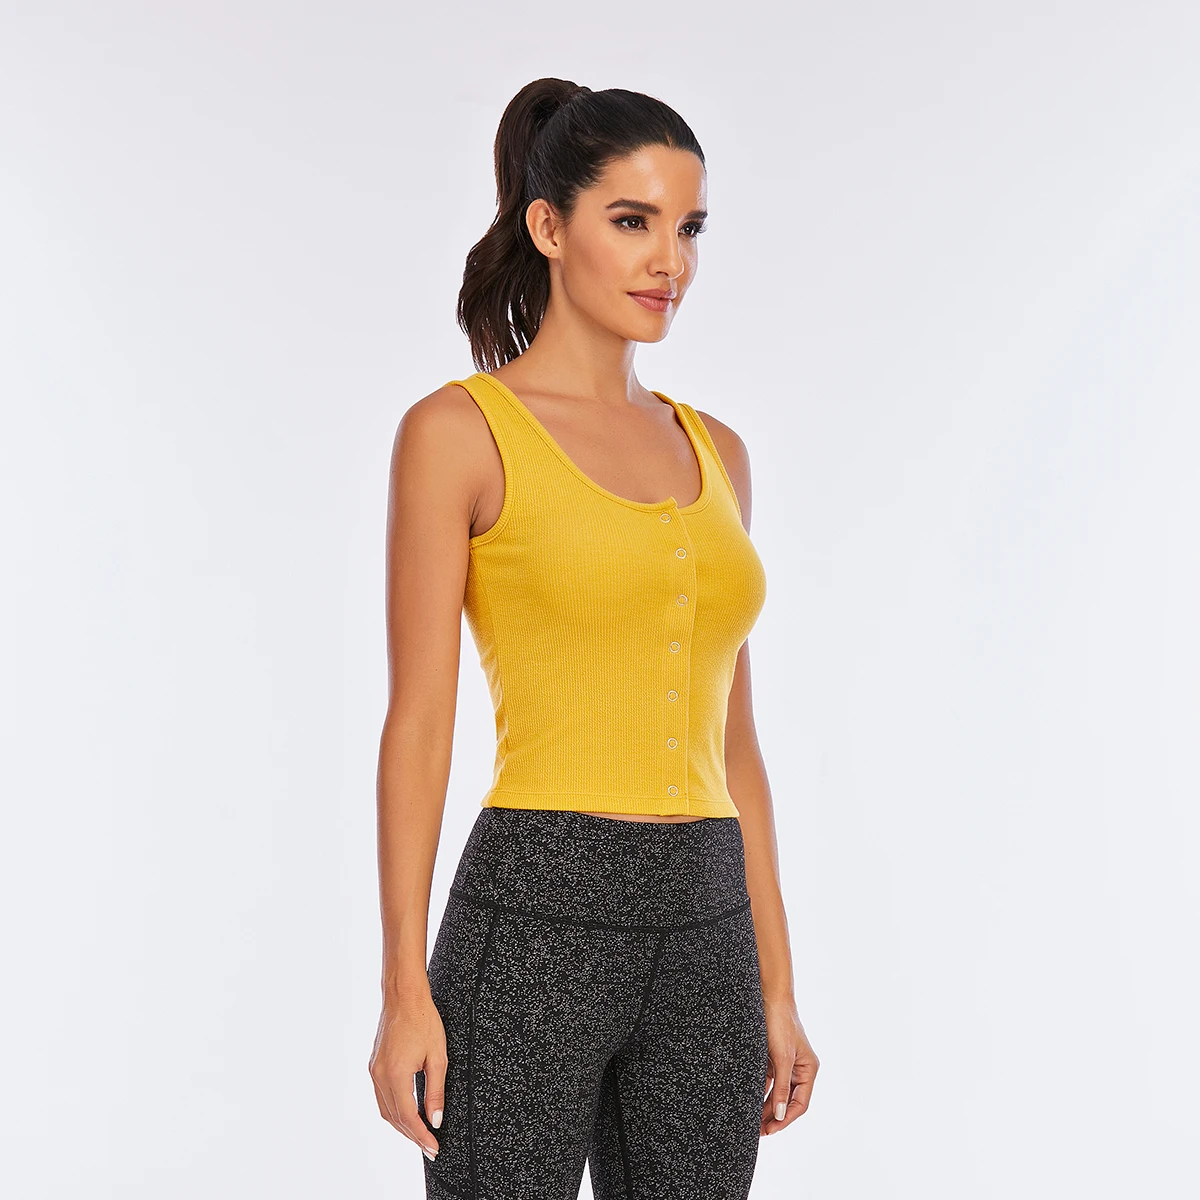 

Fitness Girls Yellow Crop Tops for Women Sleeveless Gym Wear Sports Clothing, Any color available